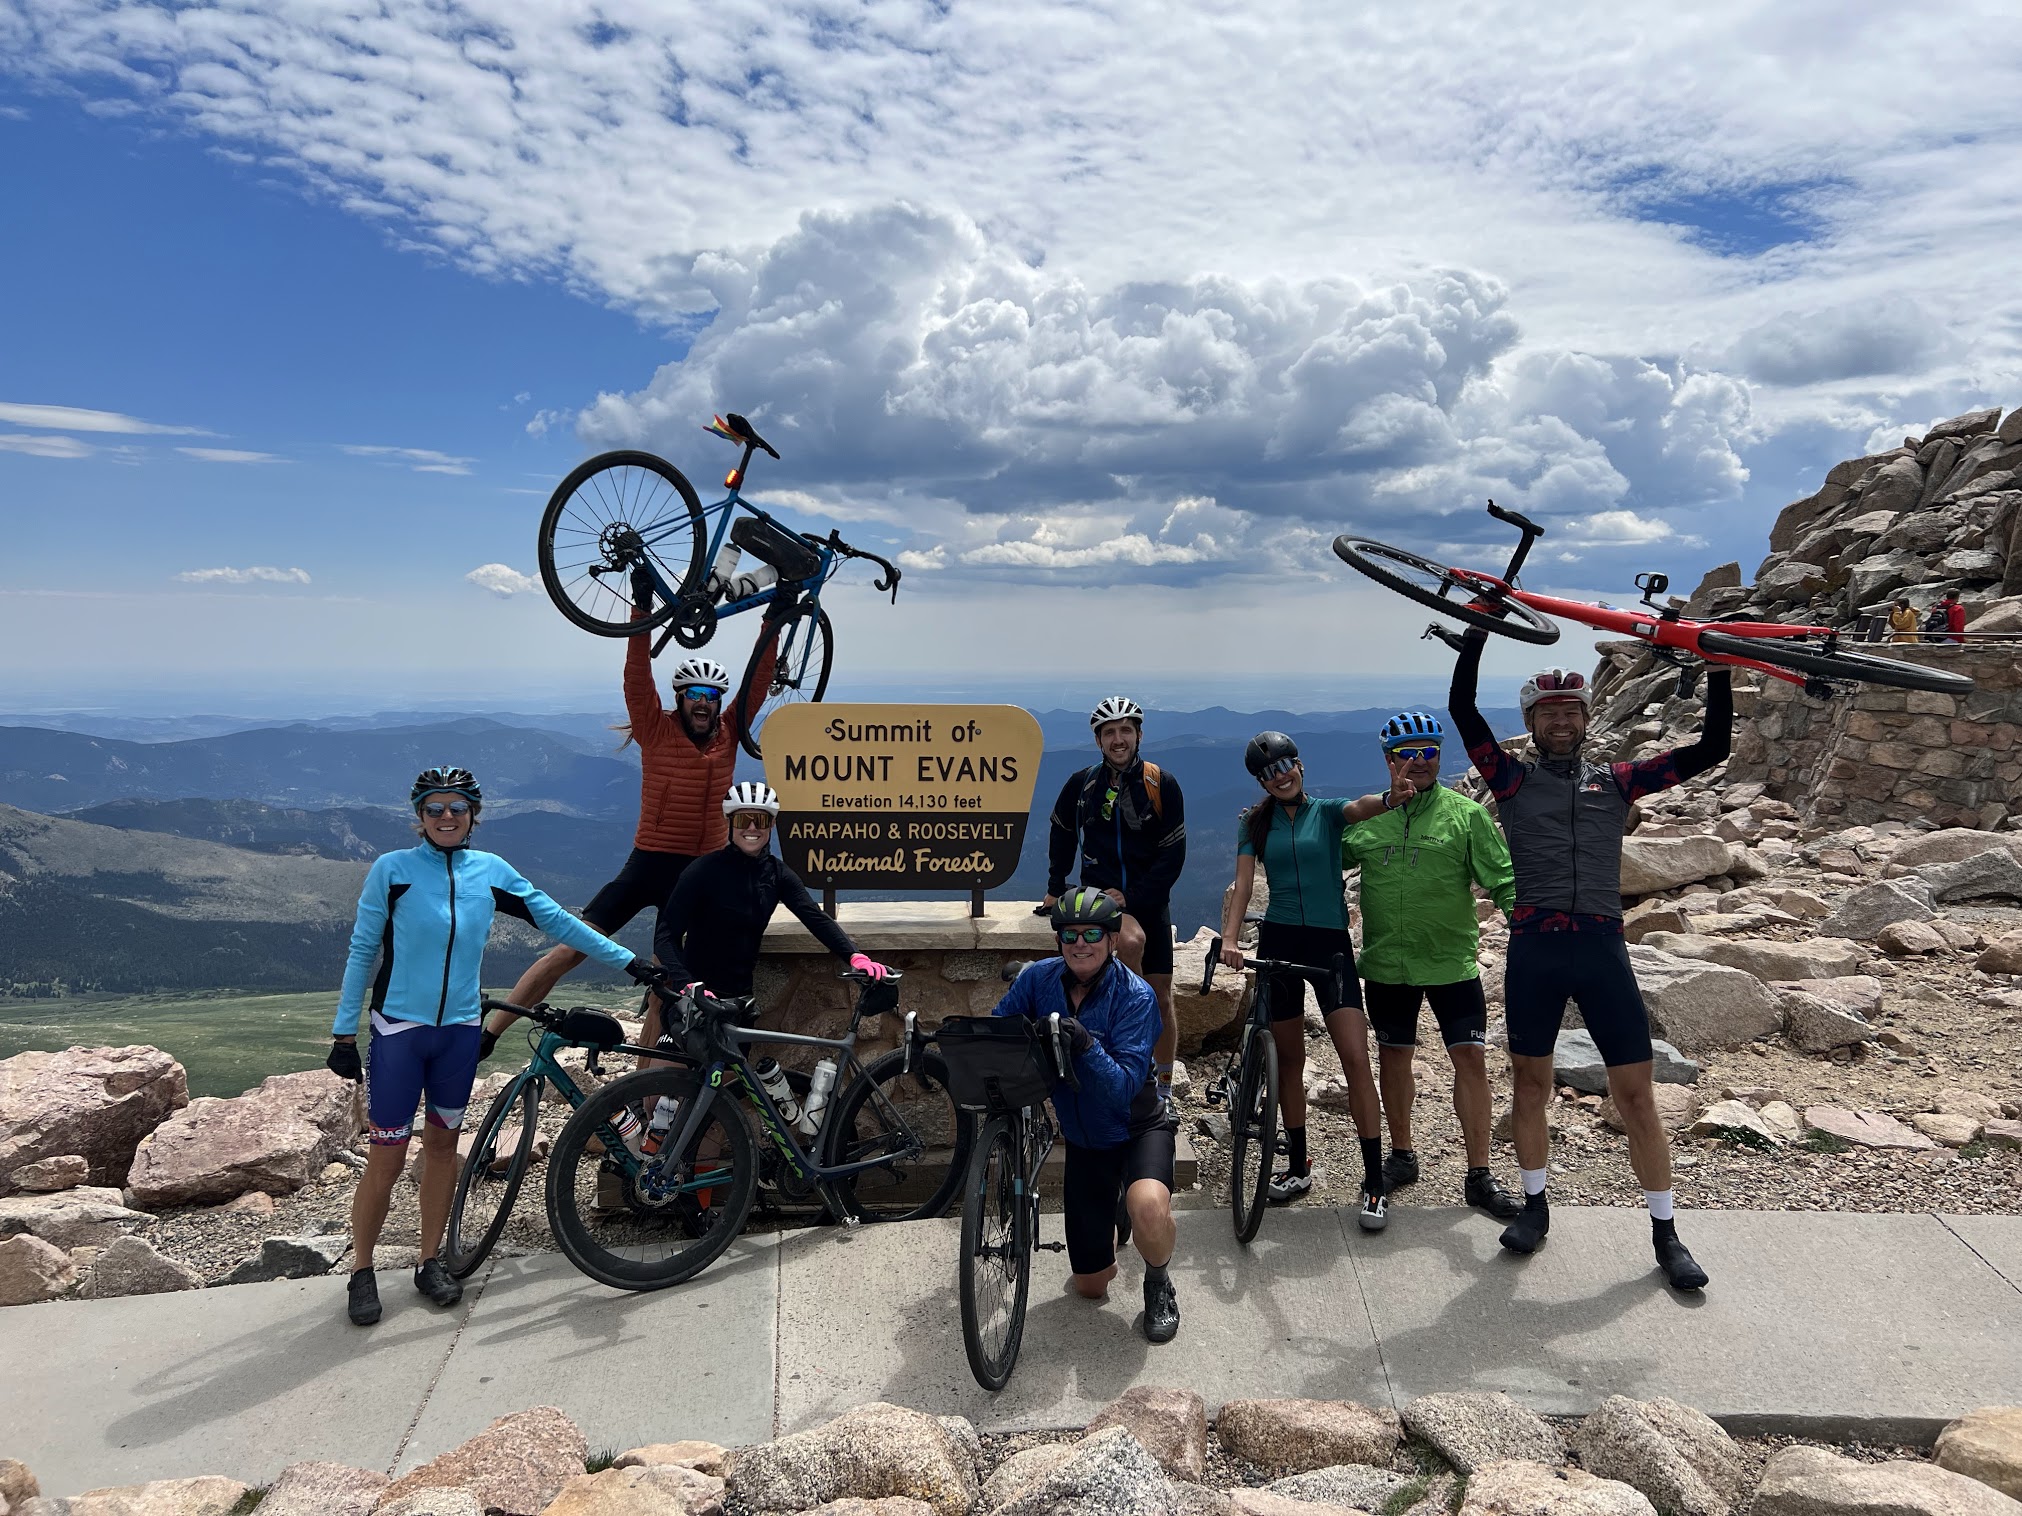 Group climb up to the top of Mount Evans - 14,000ft!